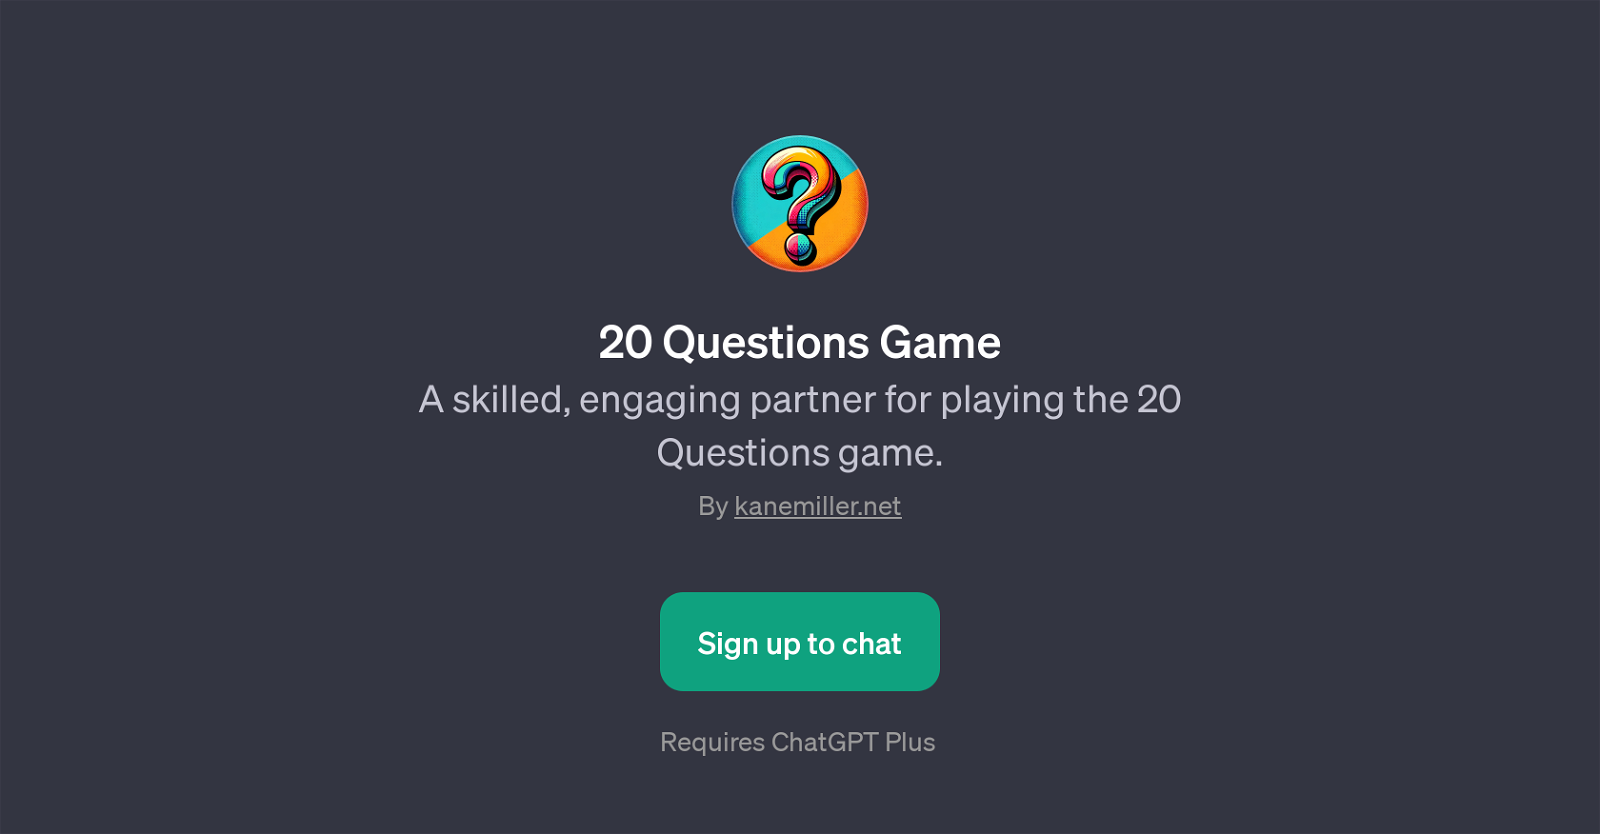 20 Questions Game website